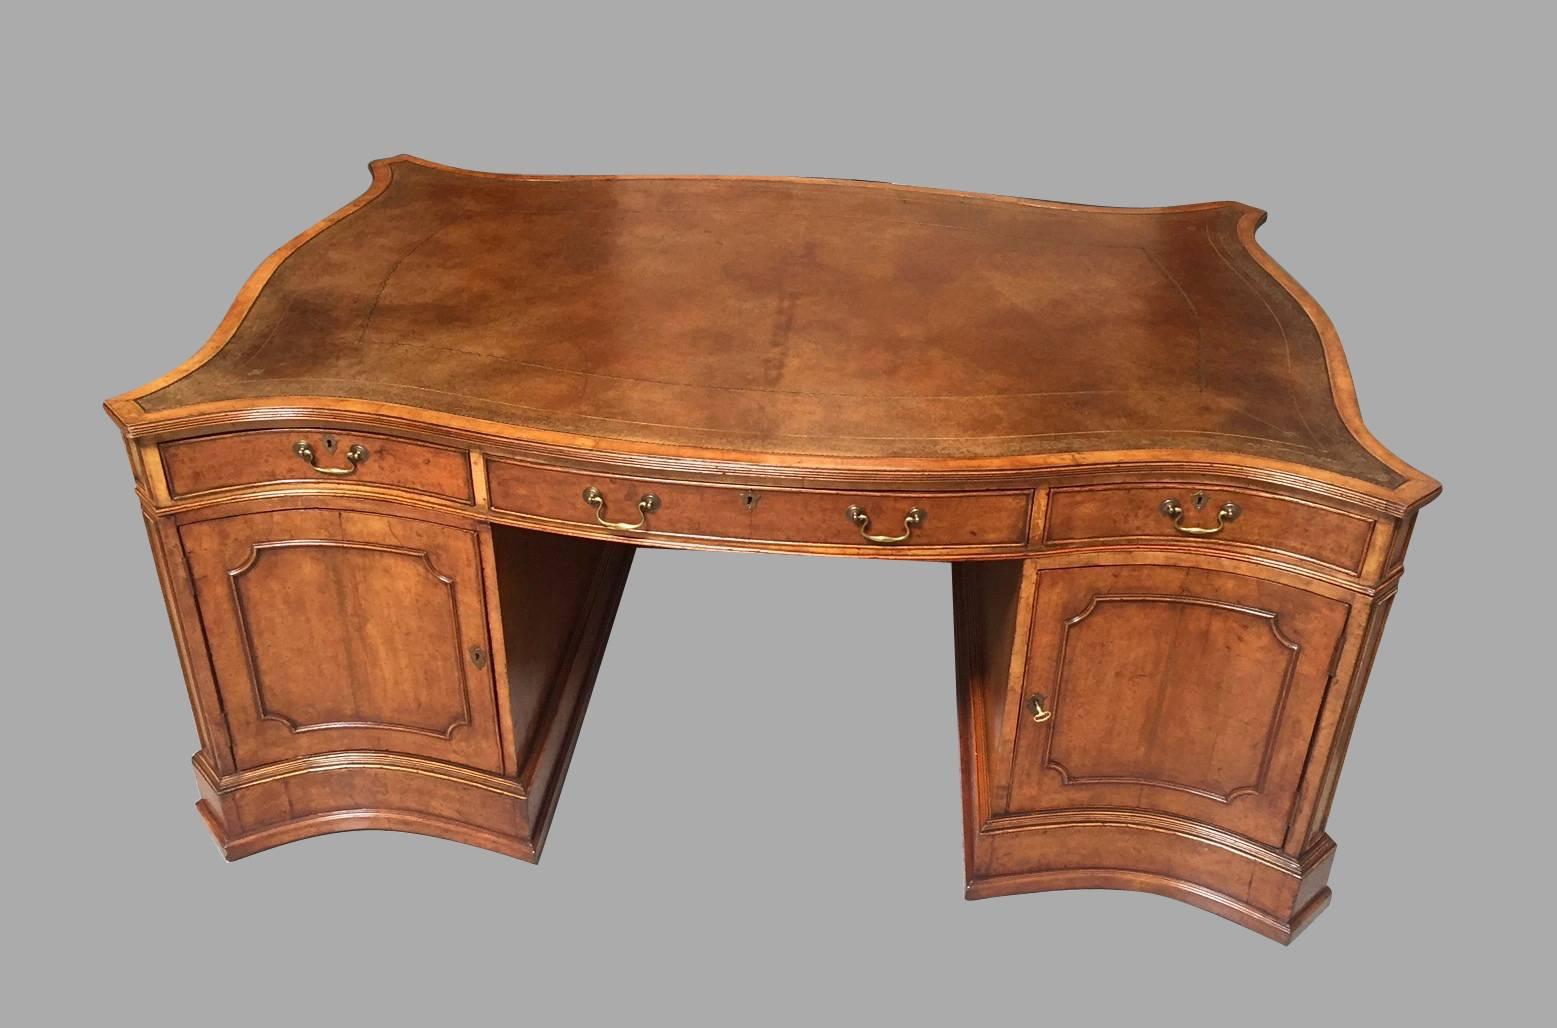 English Large Burl Elm Serpentine Partners Desk with Gilt-Tooled Leather Top